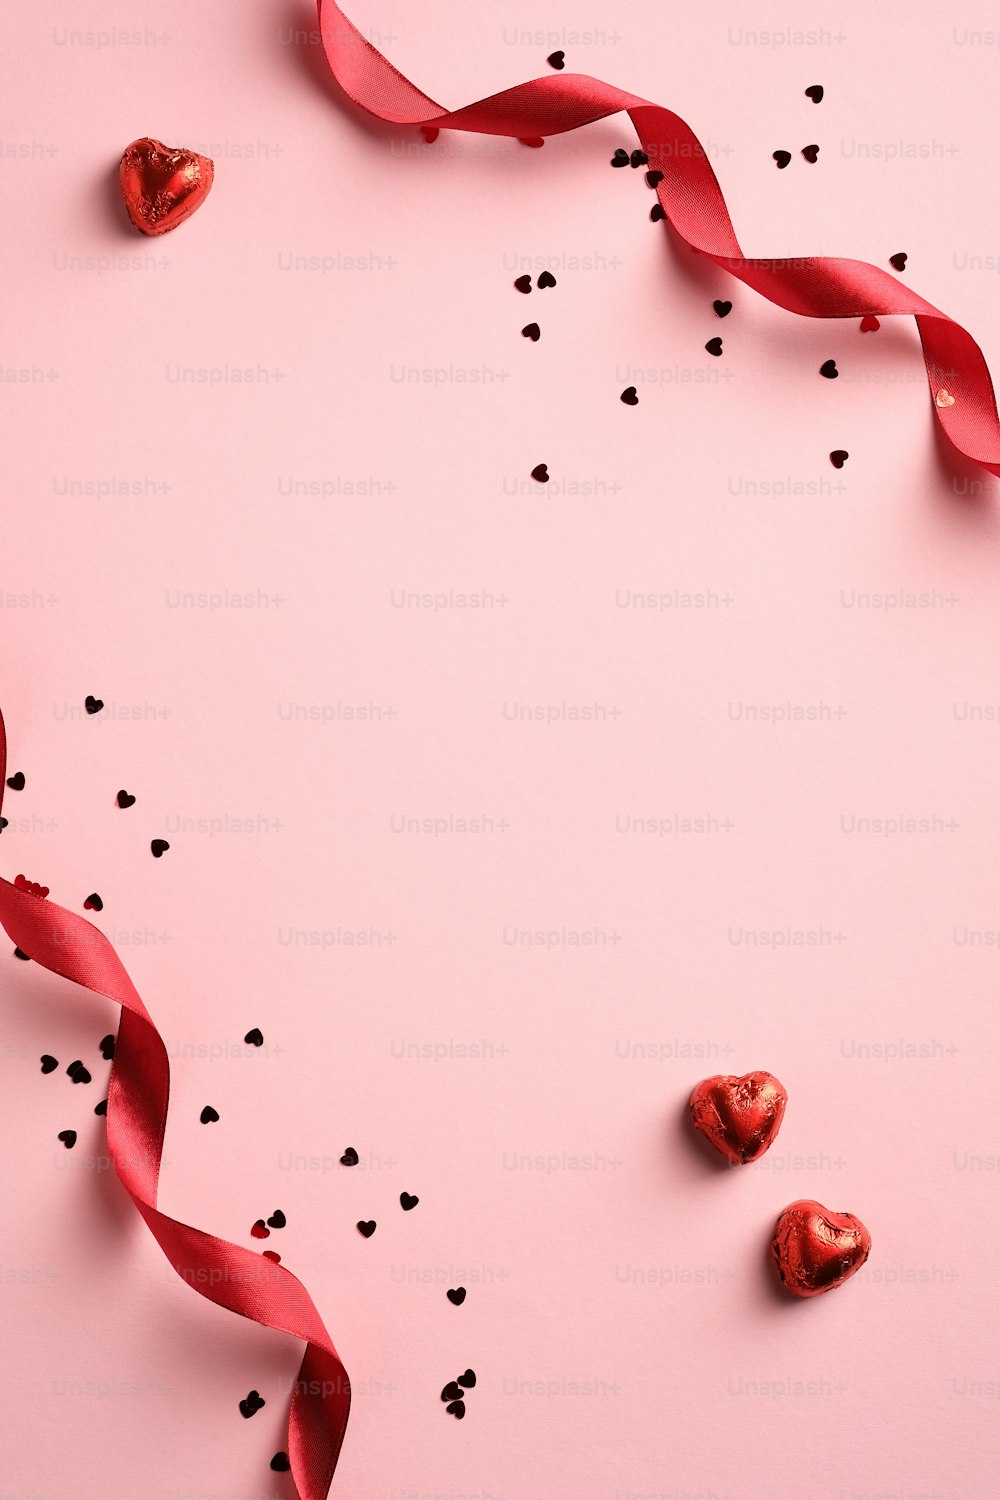 Elegant Valentines Day background with red ribbon, confetti, heart shaped sweets on pink background. Minimal style. Flat lay.